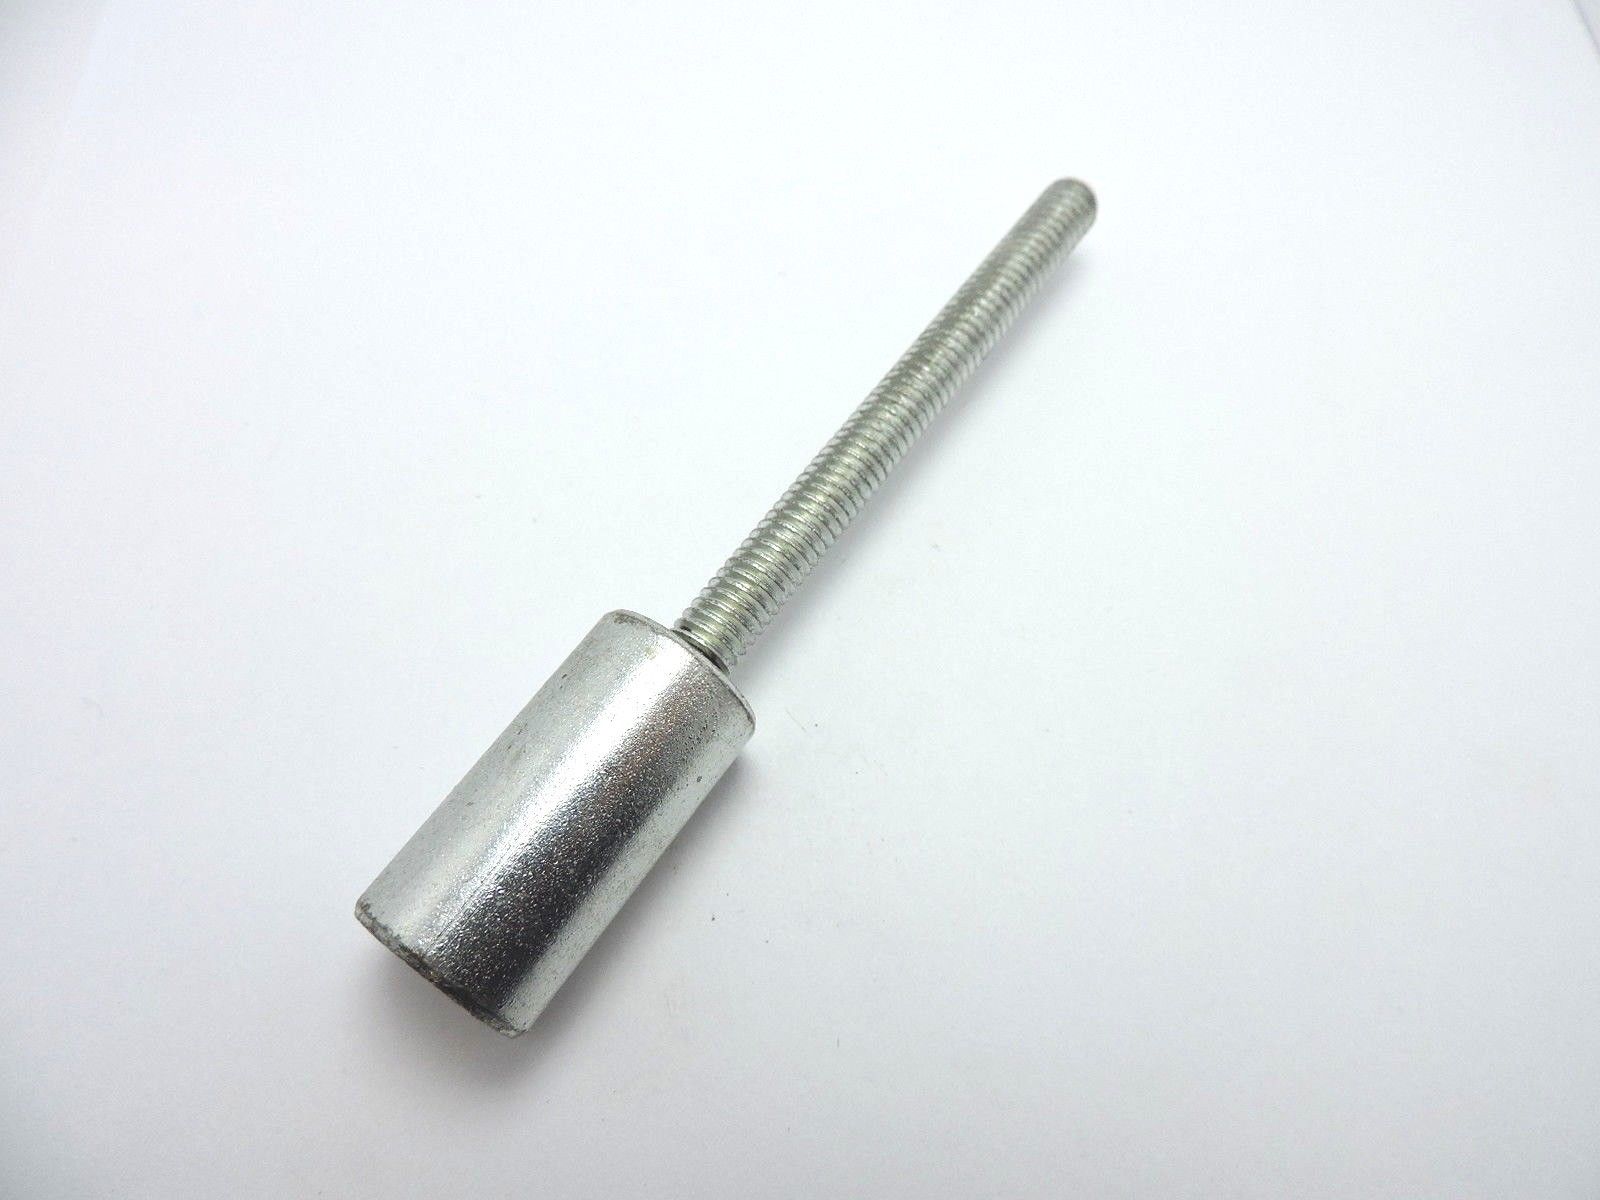 Shoe Post and Stud - Berkel OEM Part # 4575-0117 - Available from City Food Equipment